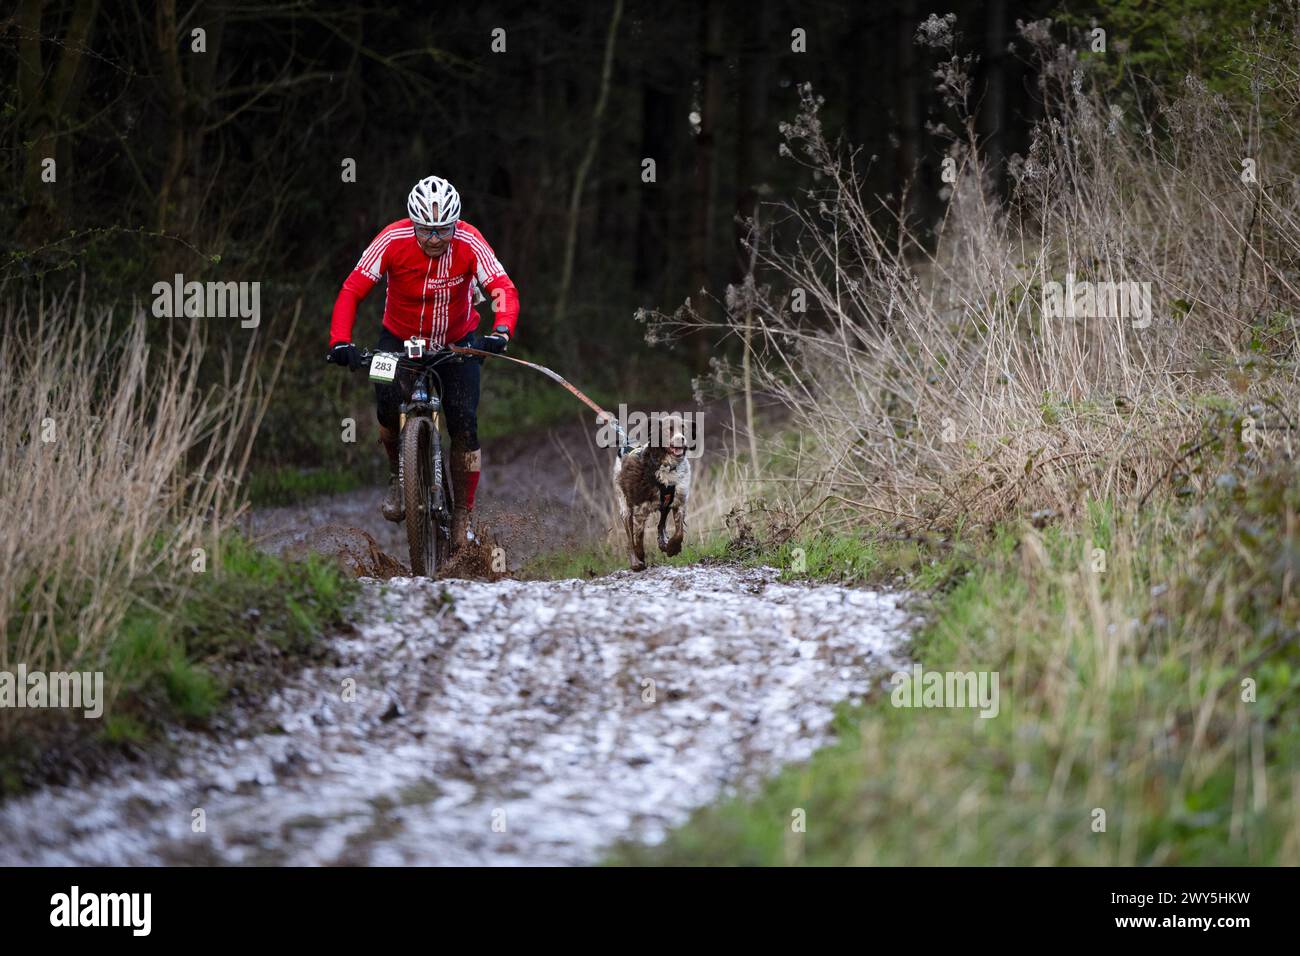 30/03/24  Competitors at the Canicross Midlands three-day Easter weekend season finale, tackle deep mud at Catton Park, Walton-on-Trent, Derbyshire. Stock Photo